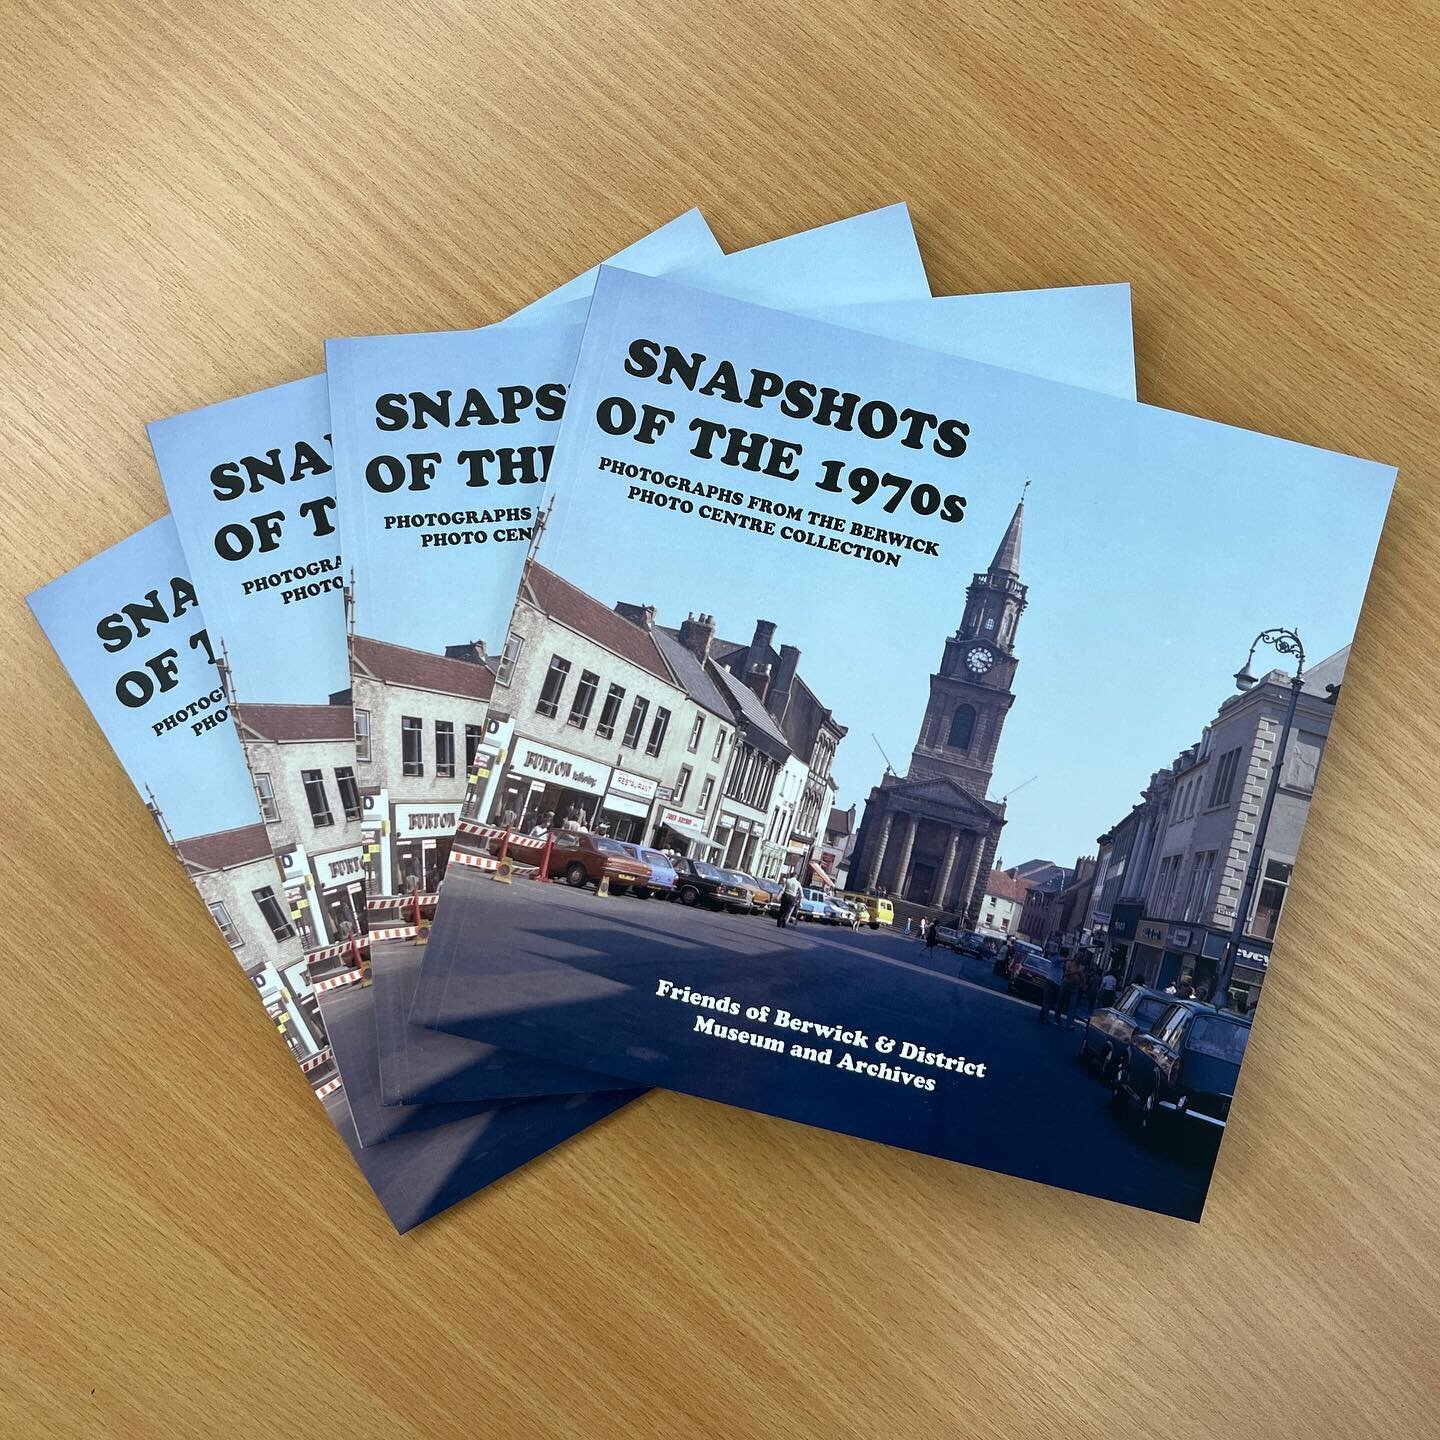 Hot off the press!!

We started work on this book about Berwick in the 1970s back in 2019 but of course the dreaded Covid meant work had to stop for quite a while as I wasn&rsquo;t able to access our negatives in the archive store. 

Earlier this yea